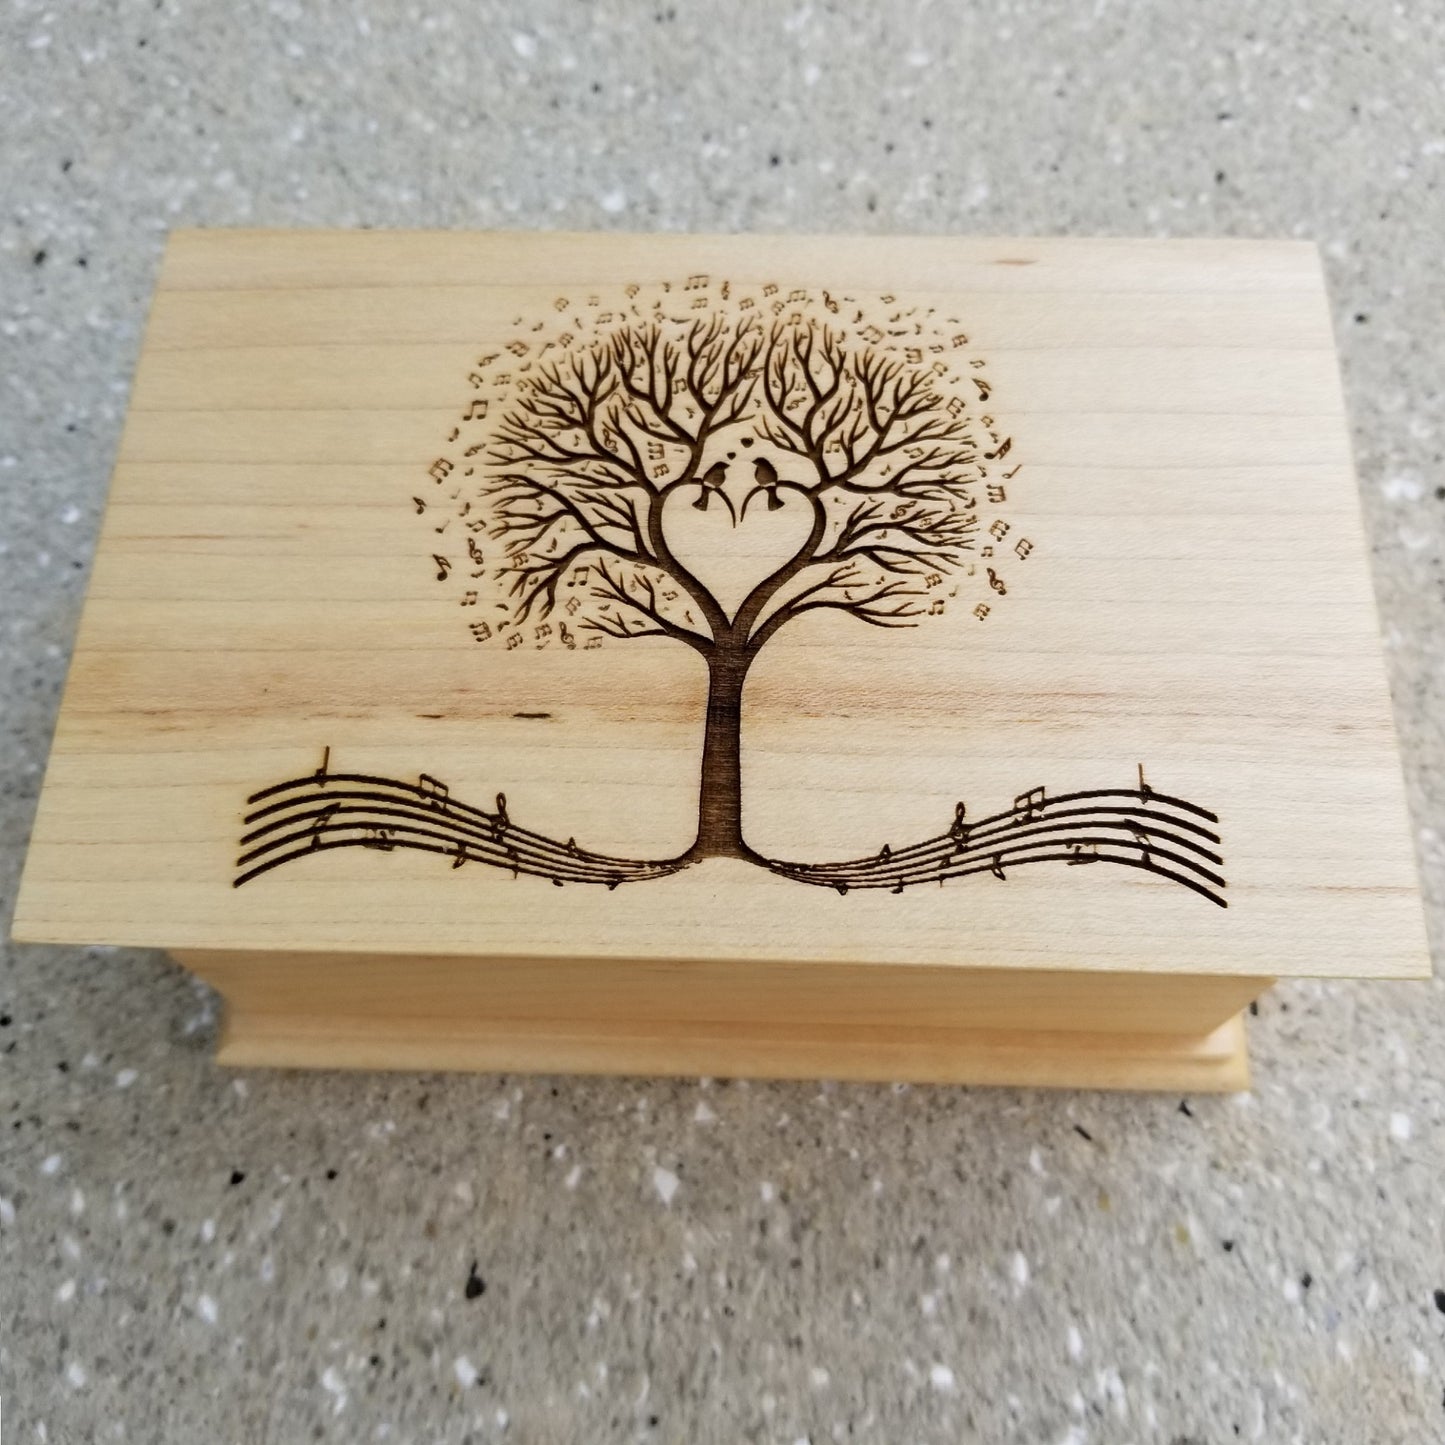 Jewelry Box with music tree engraved on top, plays your custom song